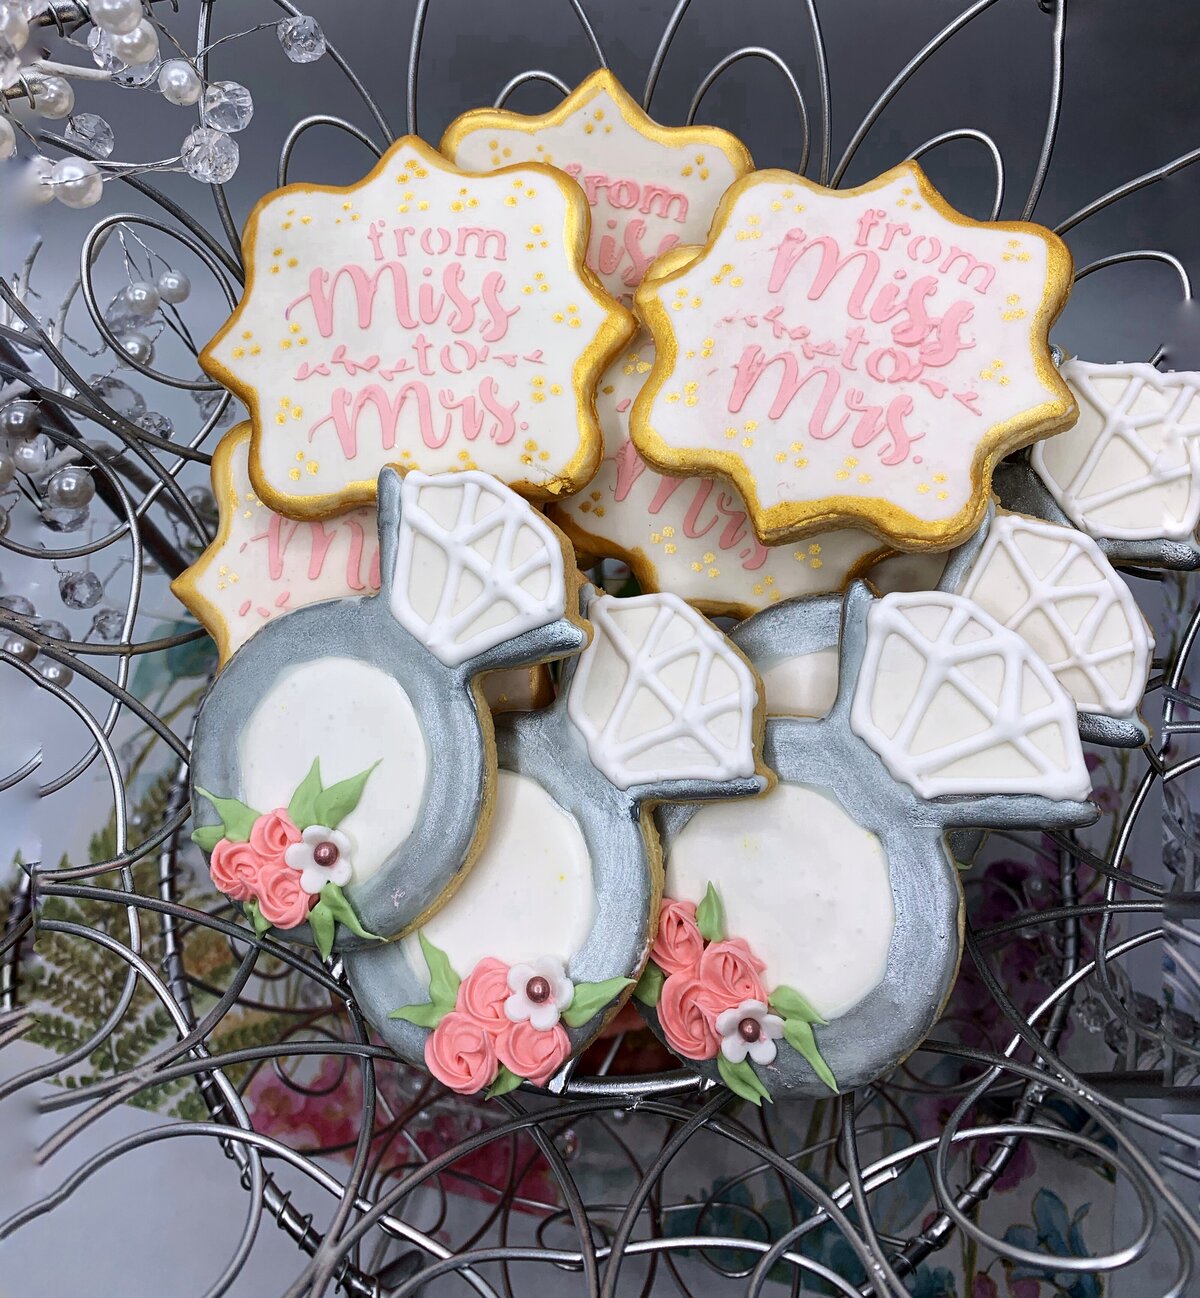 Decorated bridal shower engagement ring and "Miss to Mrs" decorated sugar cookies